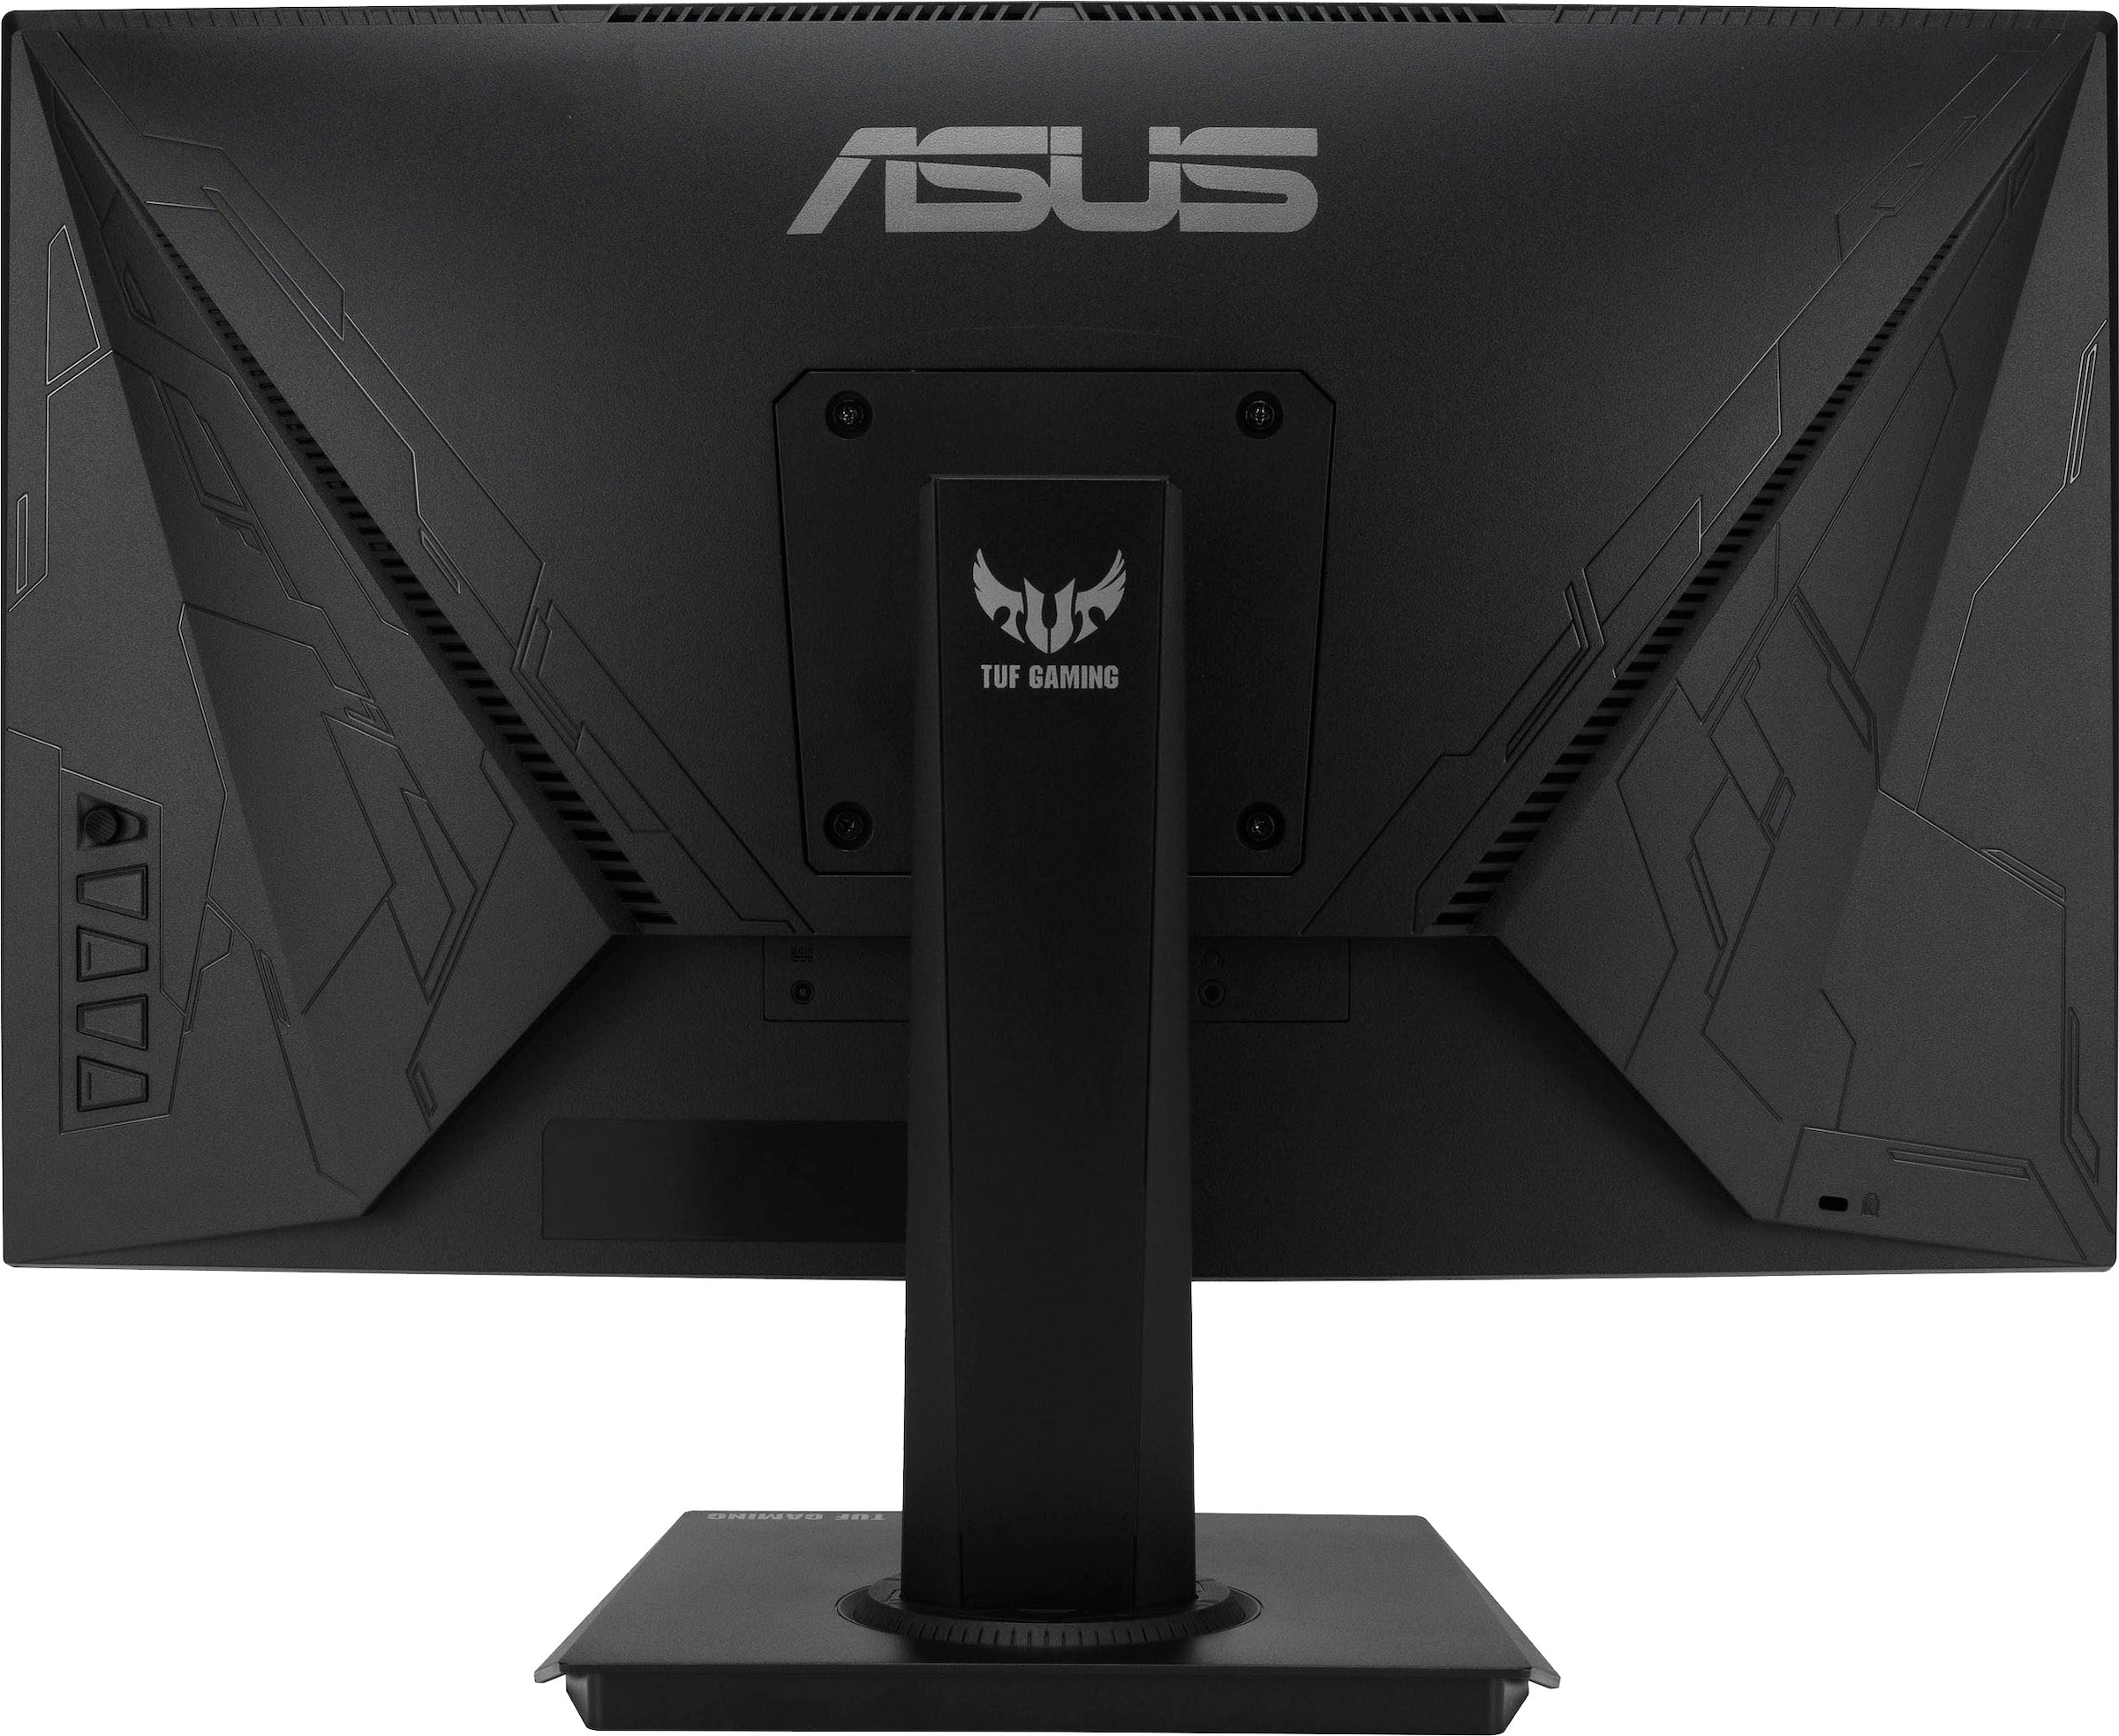 Asus Curved-Gaming-Monitor »VG24VQE«, 59,94 cm/23,6 Zoll, 1920 x 1080 px, Full HD, 1 ms Reaktionszeit, 165 Hz